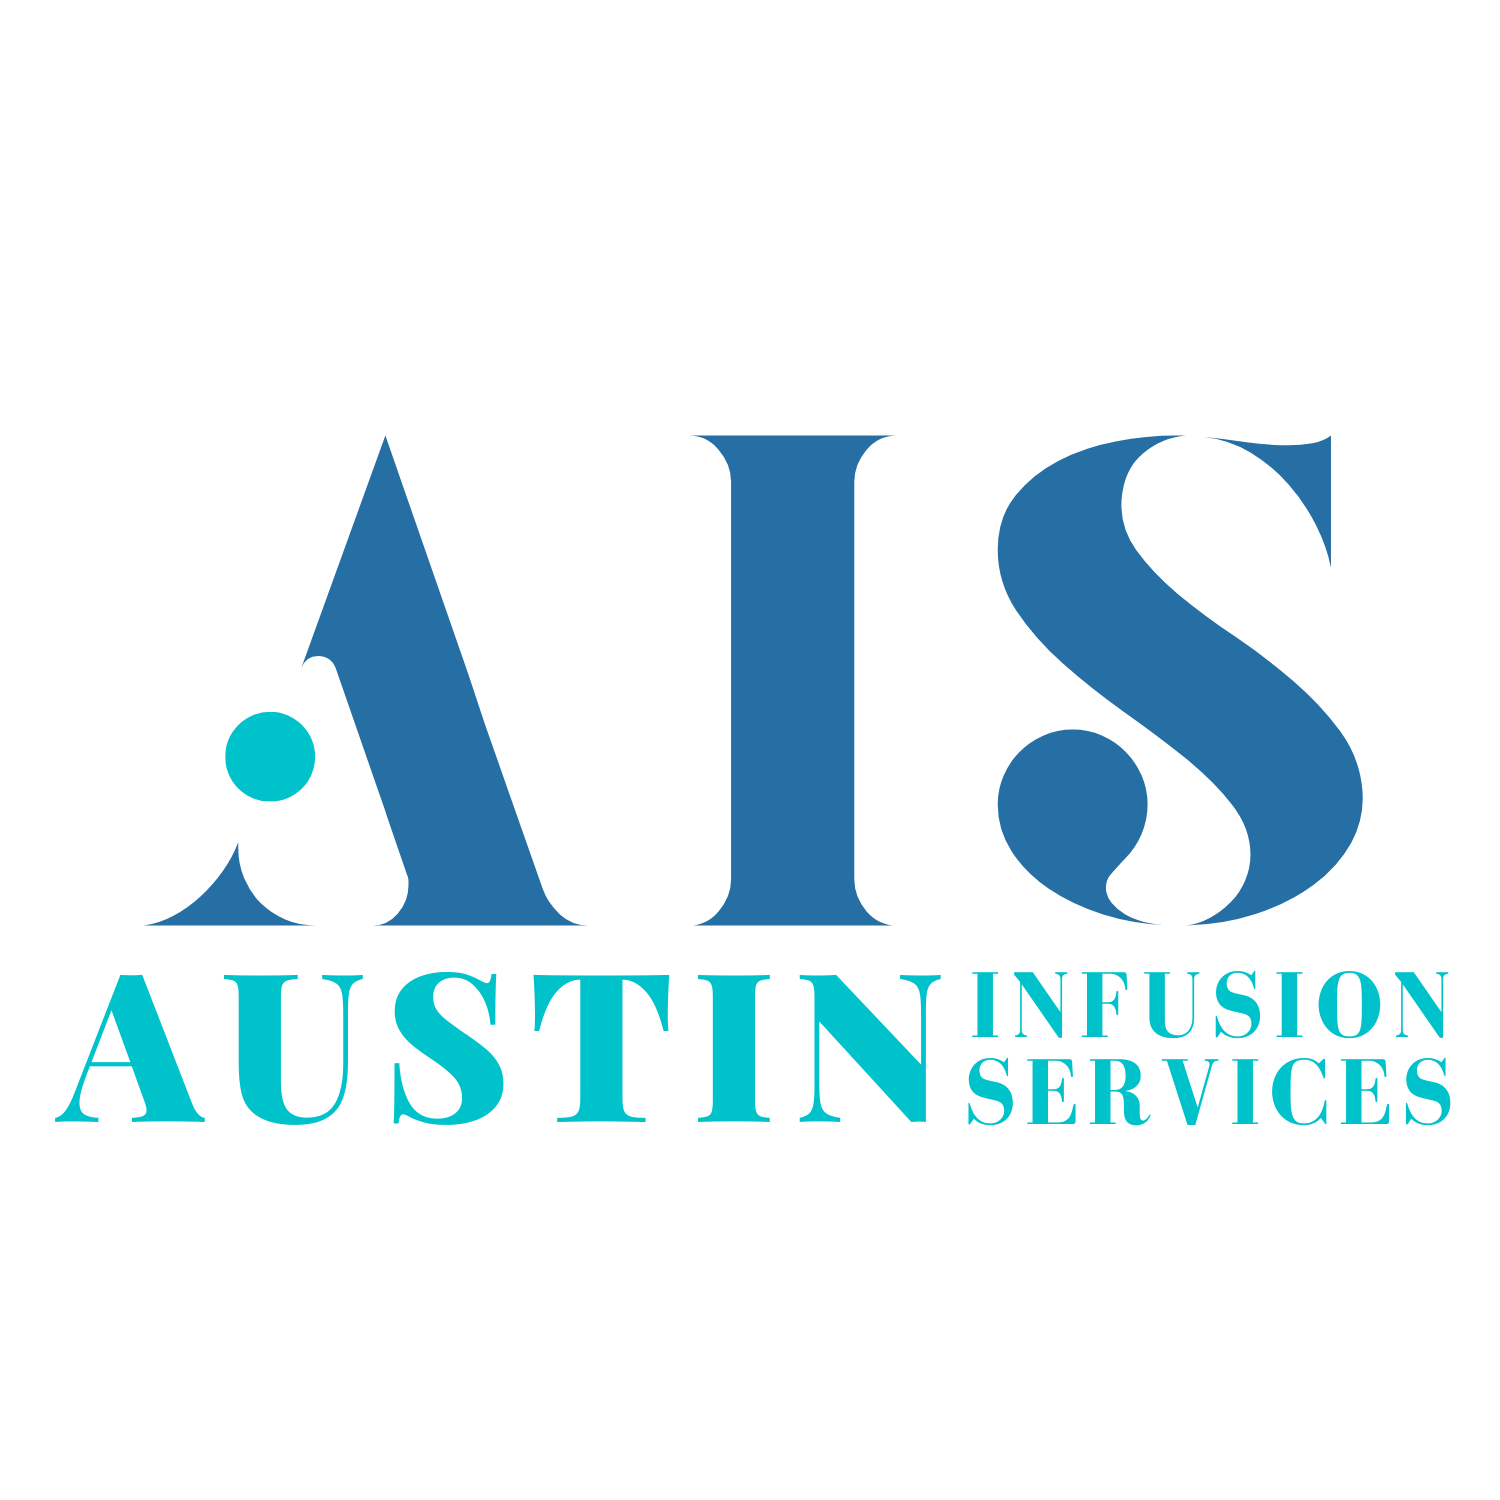 Austin Infusion Services